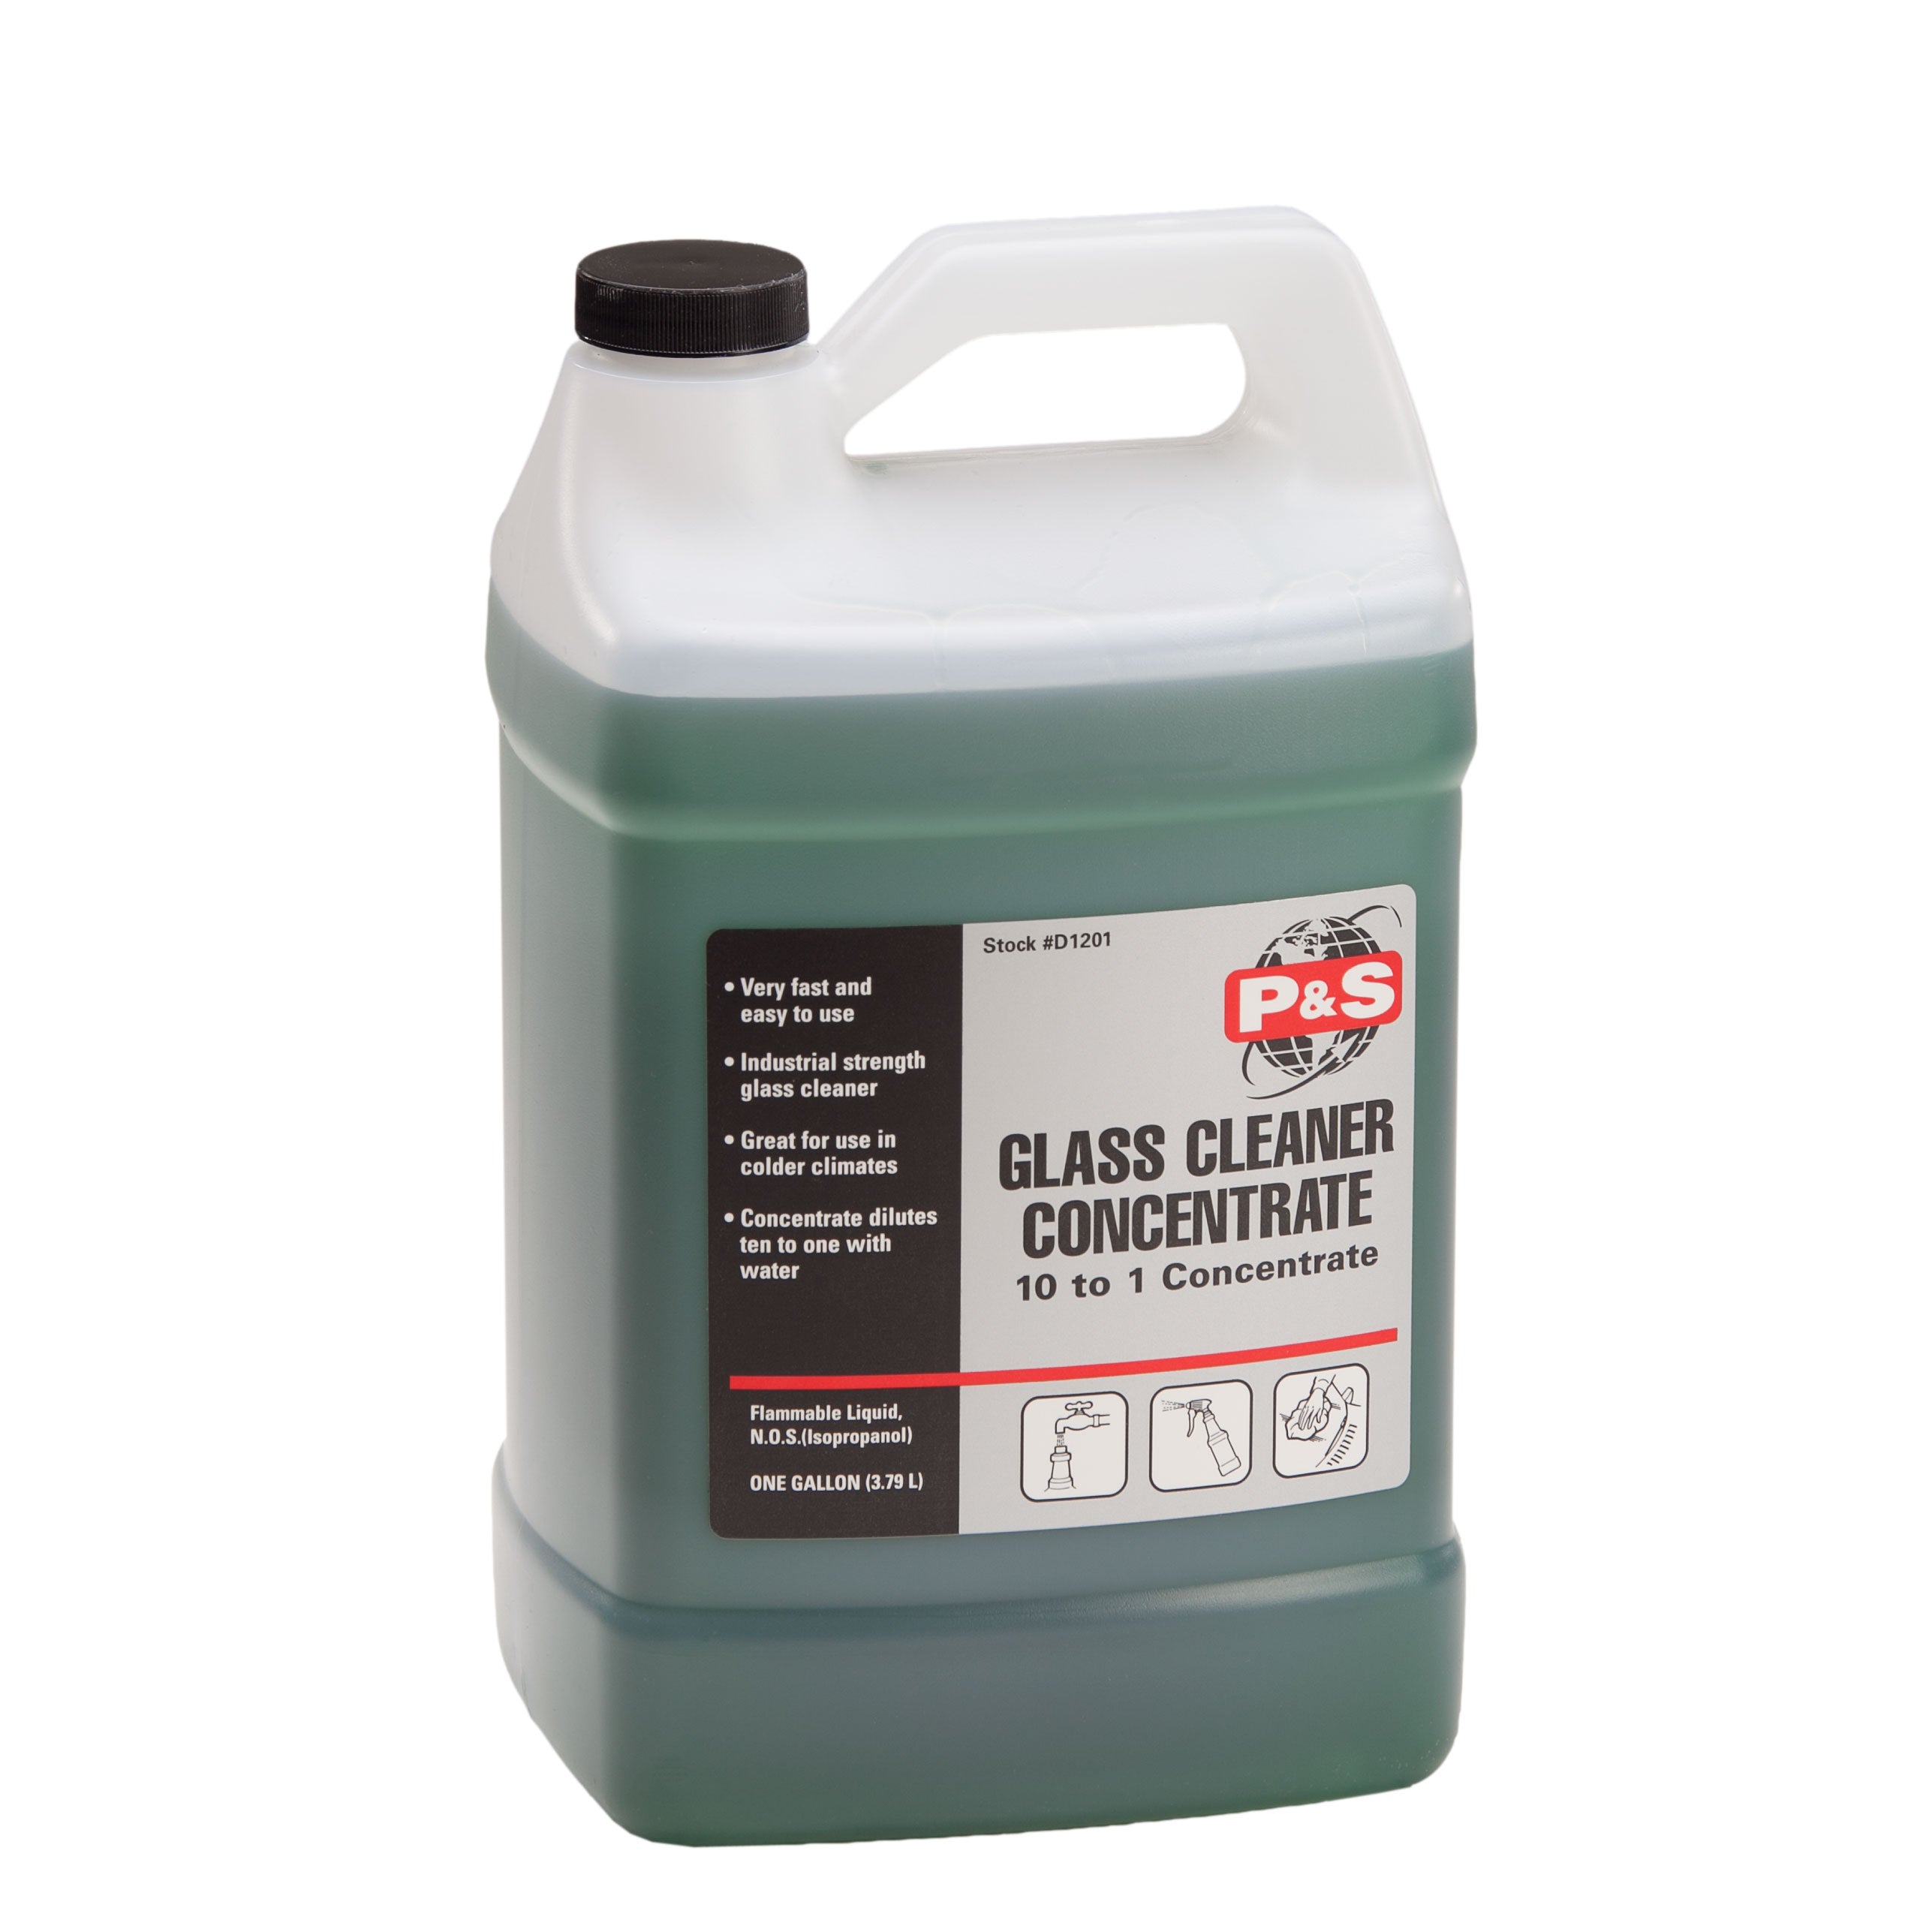 Meguiars Glass Cleaner Concentrate, 1 Gallon, dilutes to make an